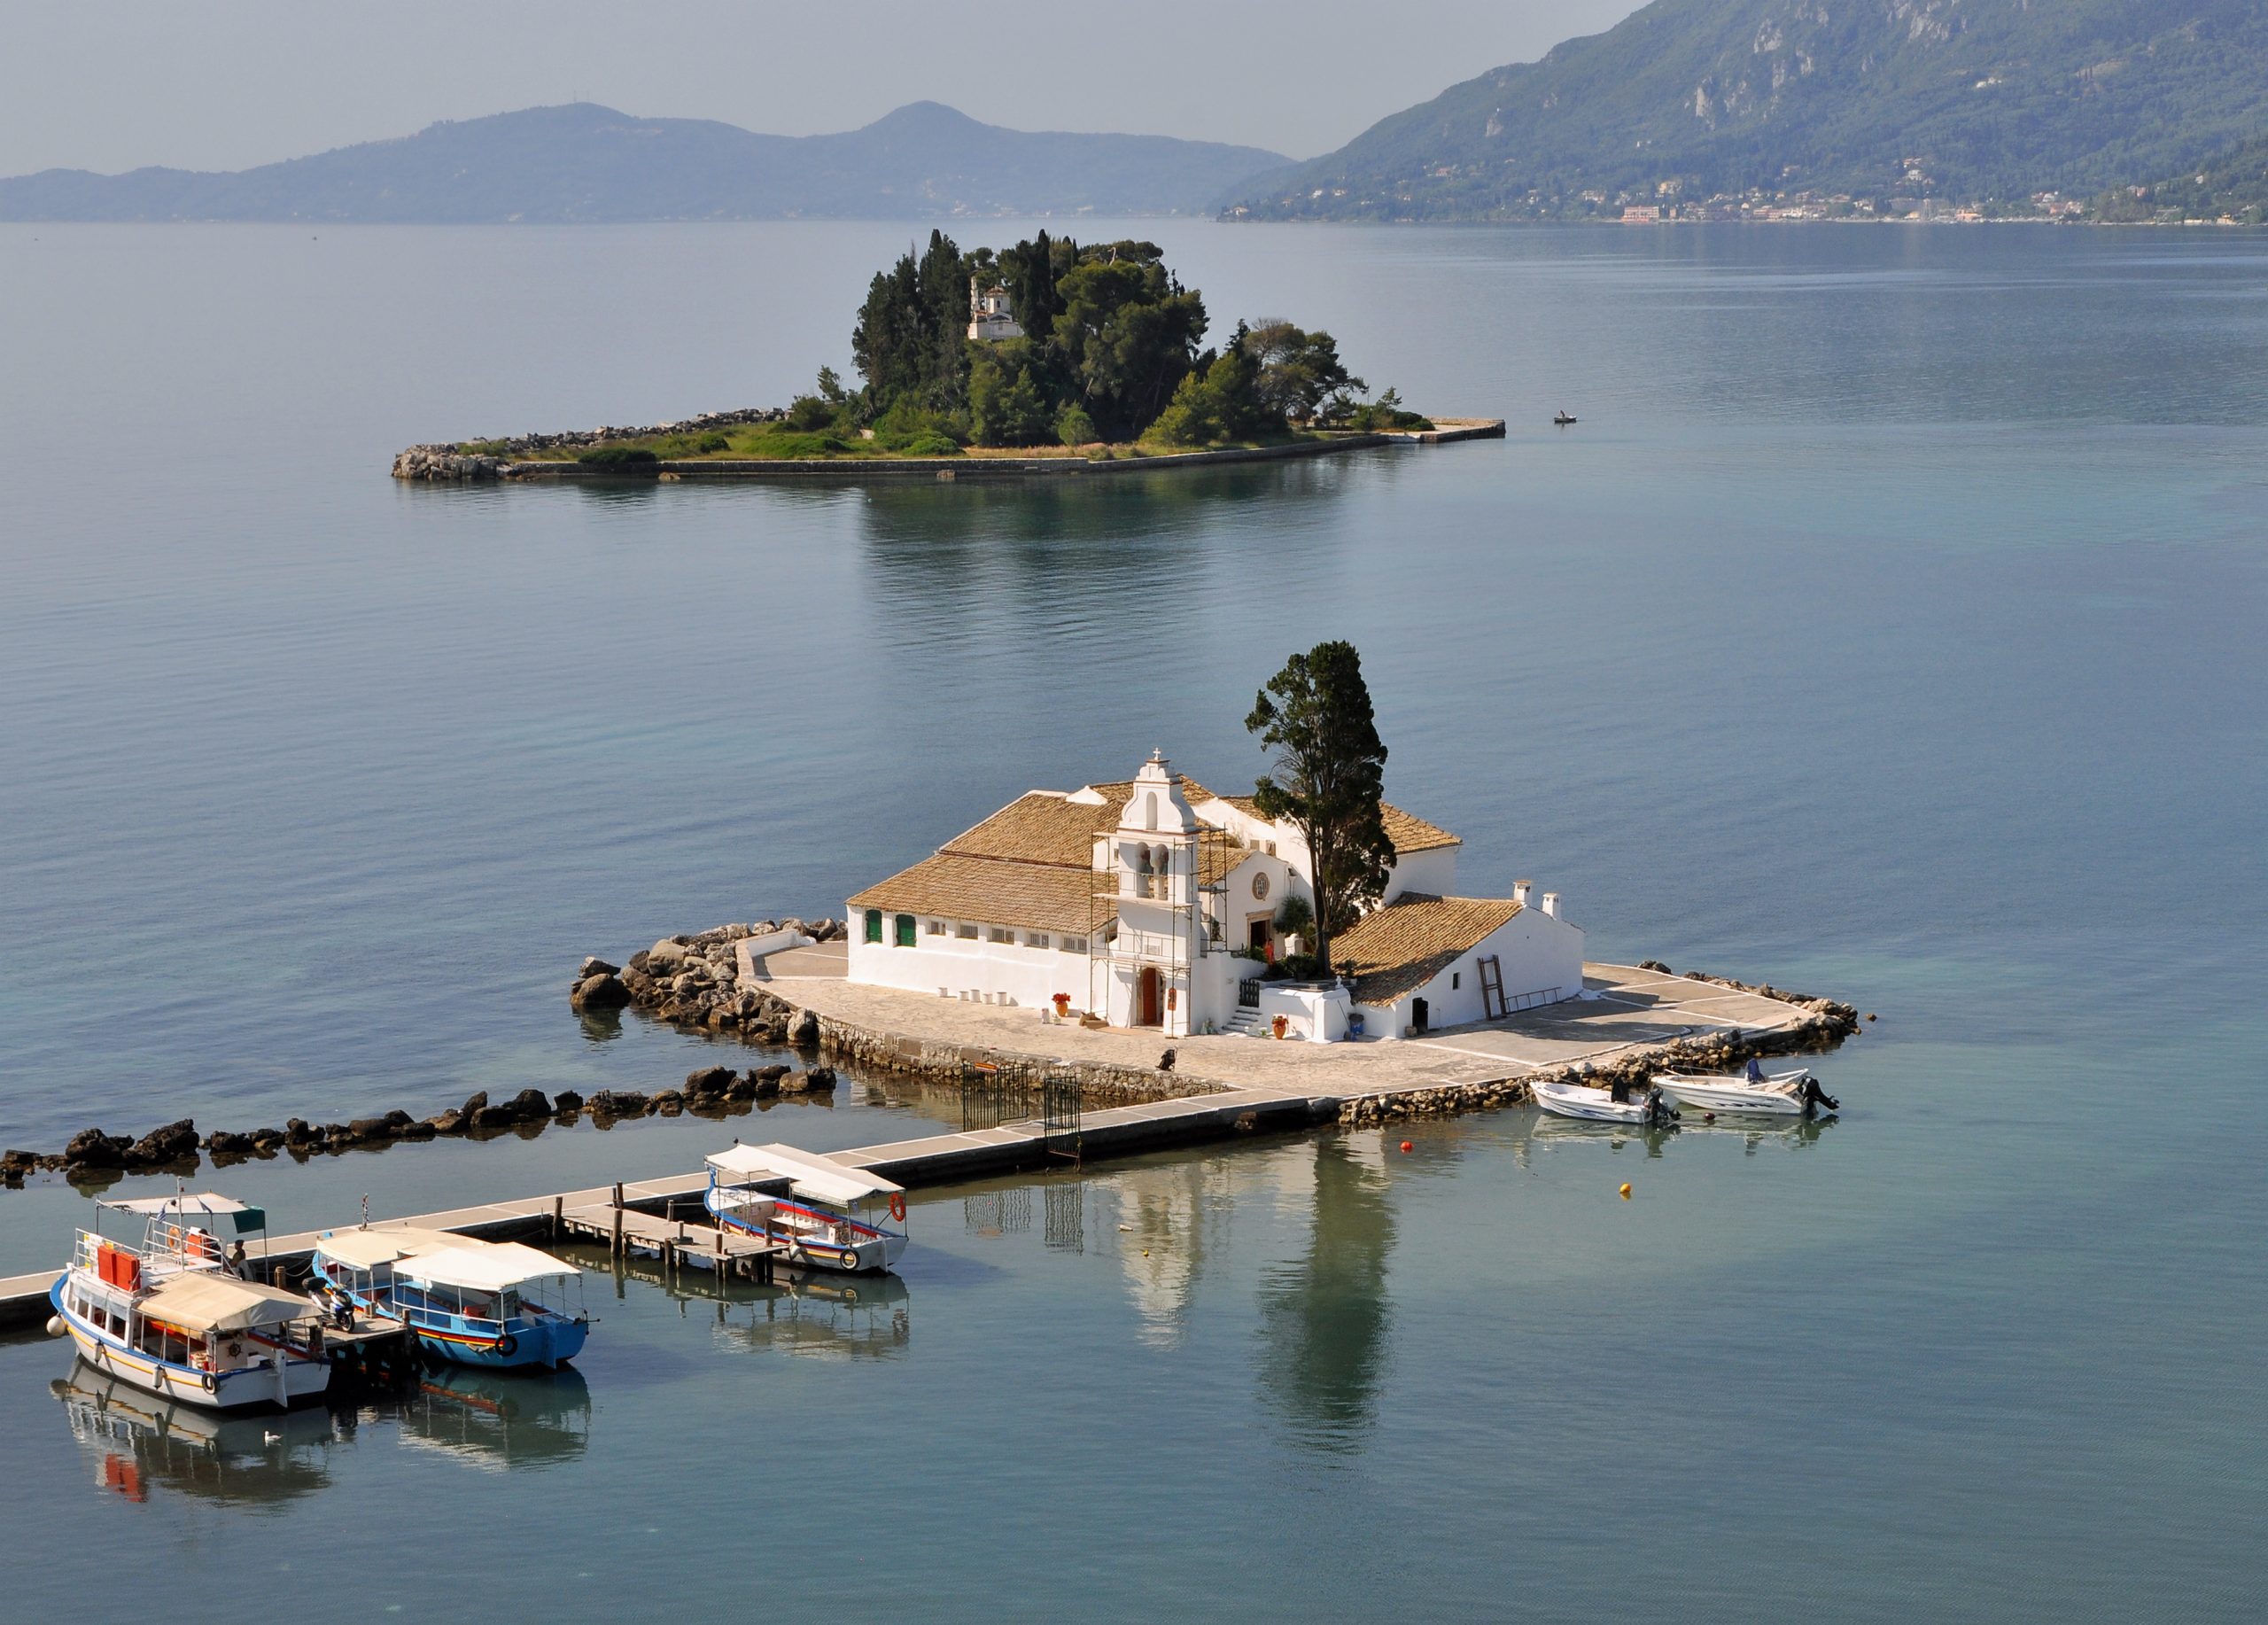 Corfu: Inundated by tourists – 90% occupancy in hotels